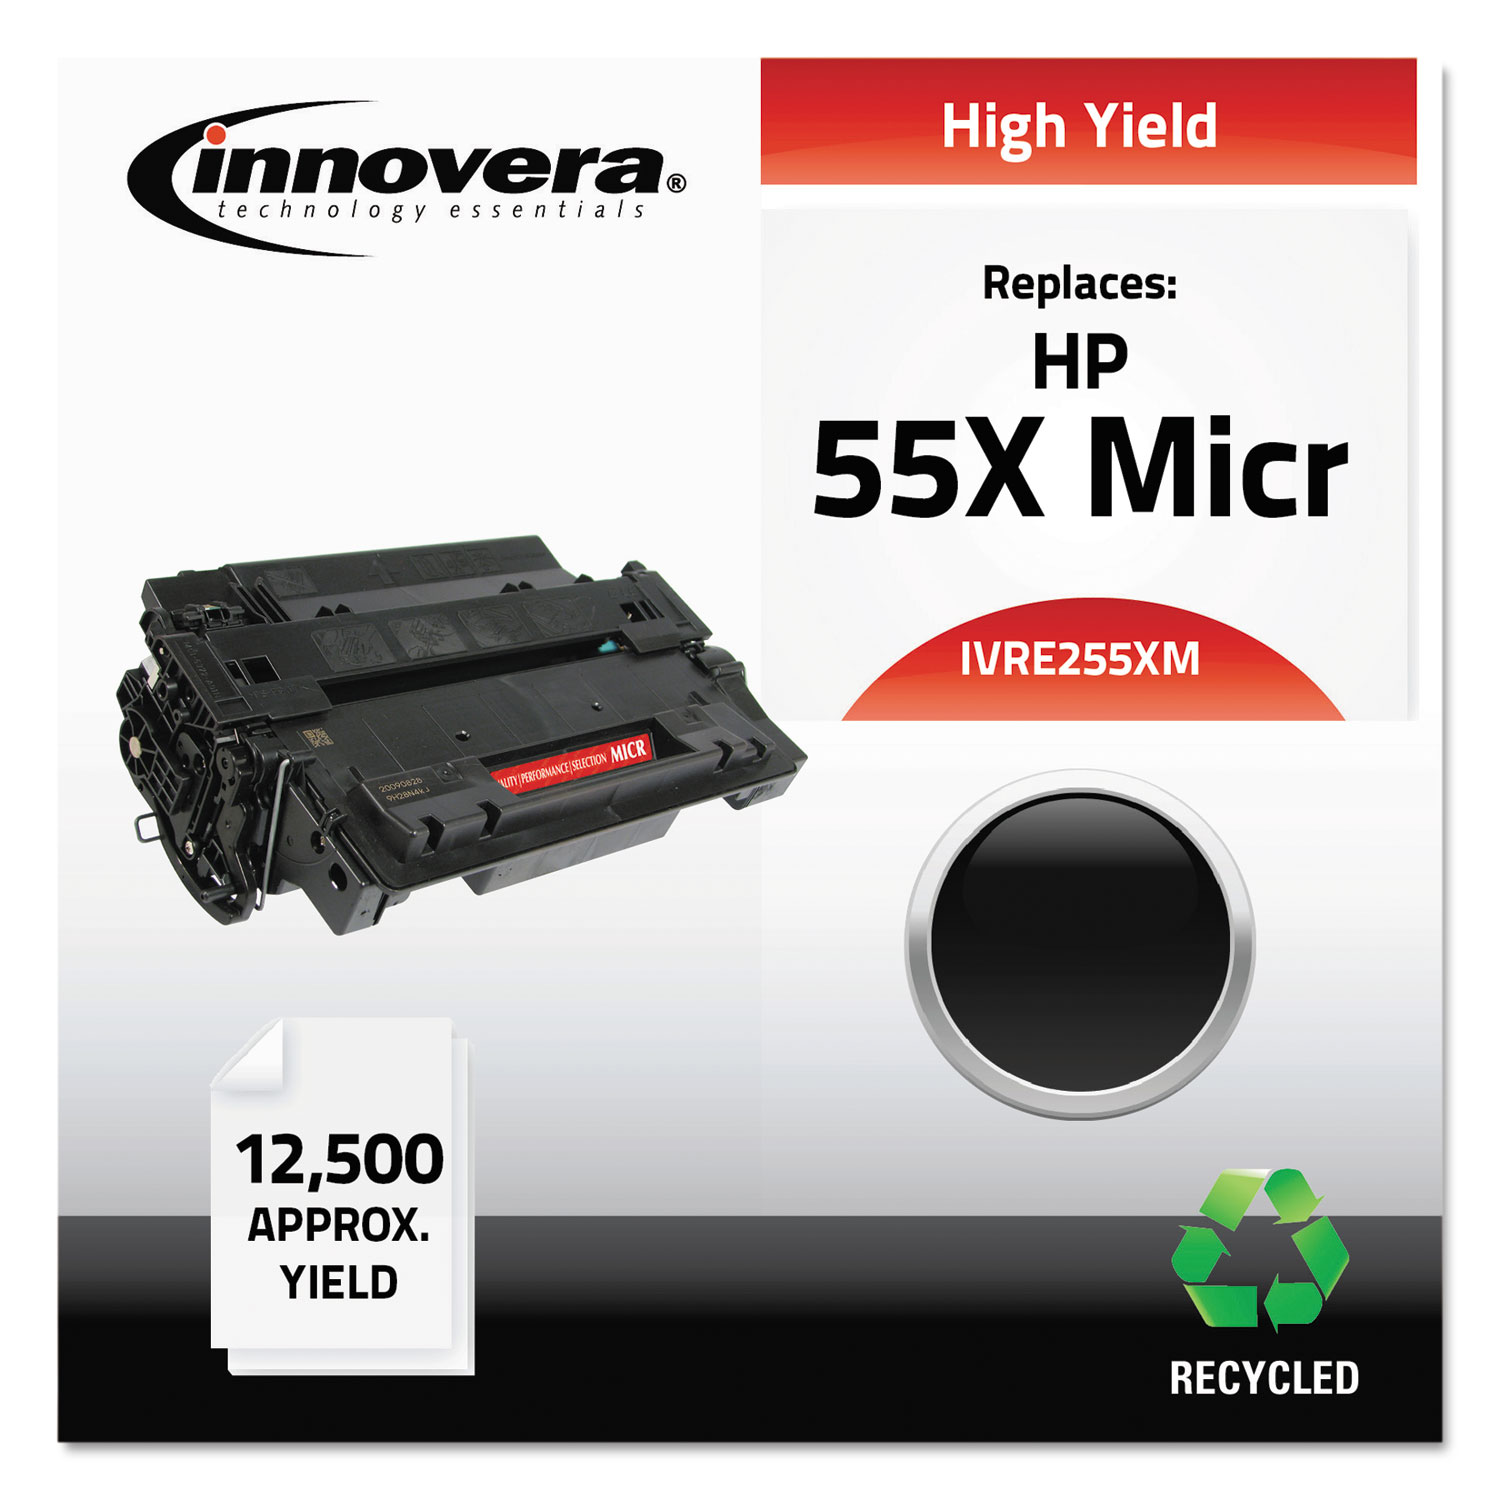  Innovera IVRE255XM Remanufactured CE255X(M) (55XM) High-Yield MICR Toner, 12500 Page-Yield, Black (IVRE255XM) 